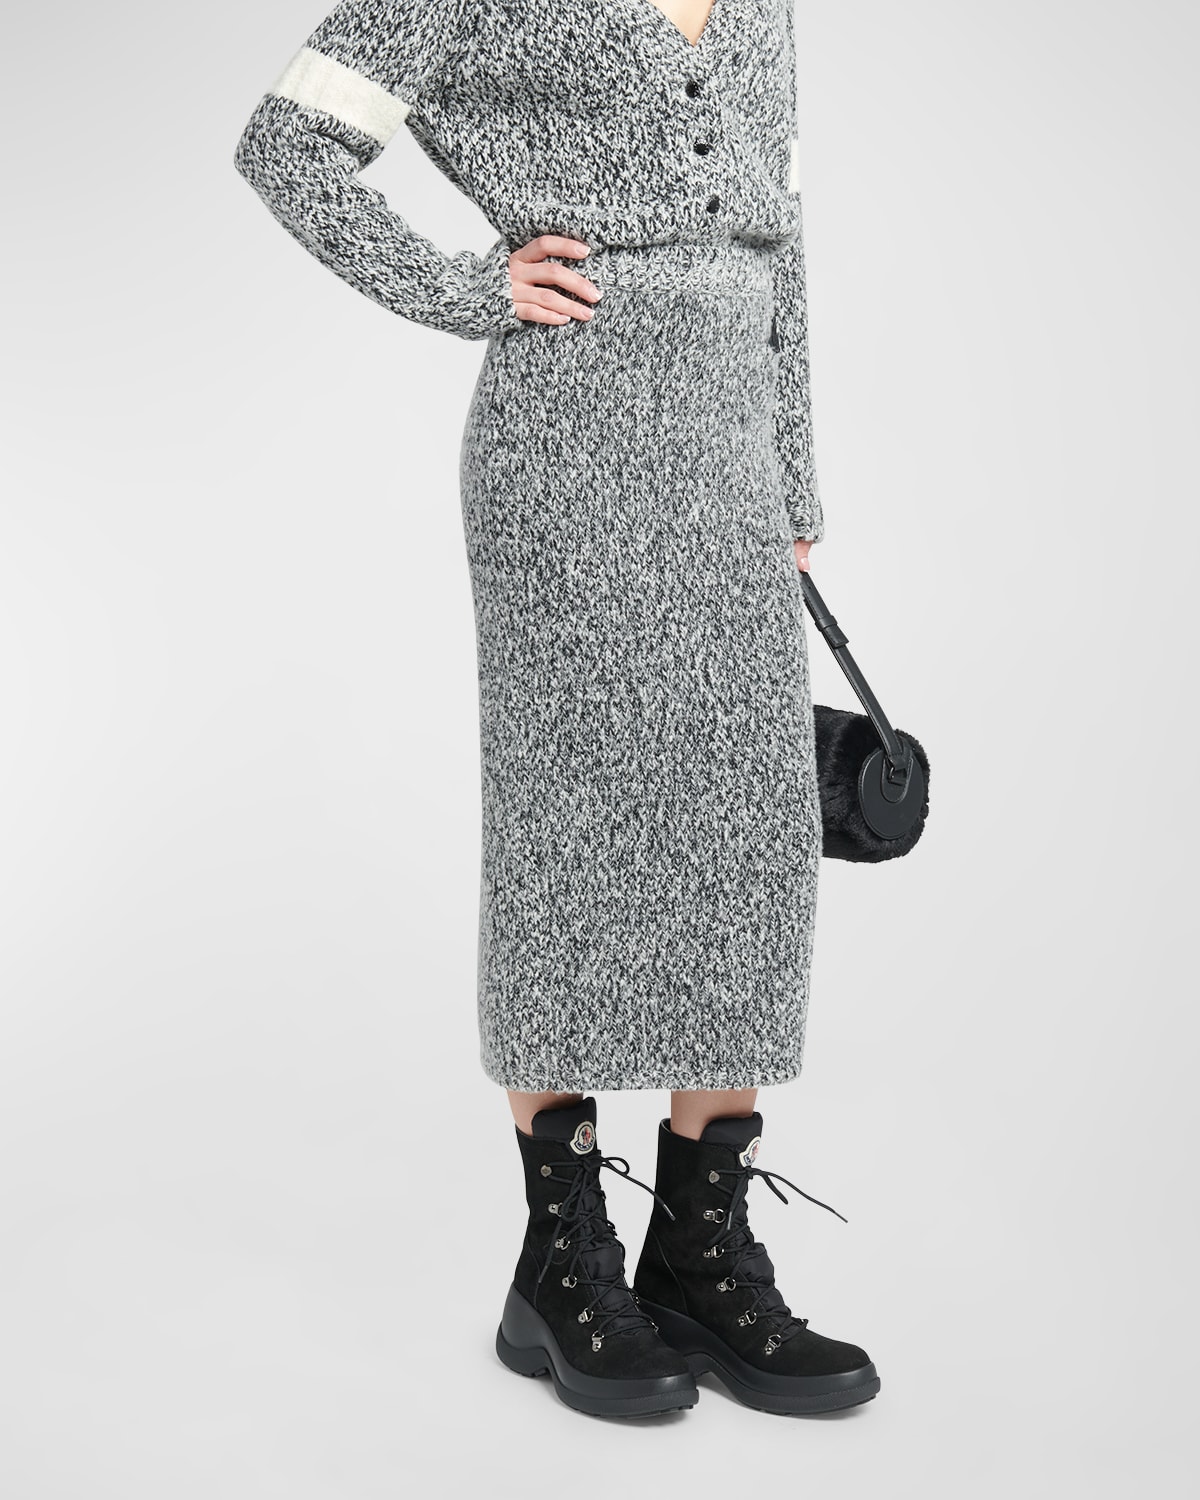 MONCLER WOOL KNITWEAR MIDI SKIRT WITH BACK ZIP